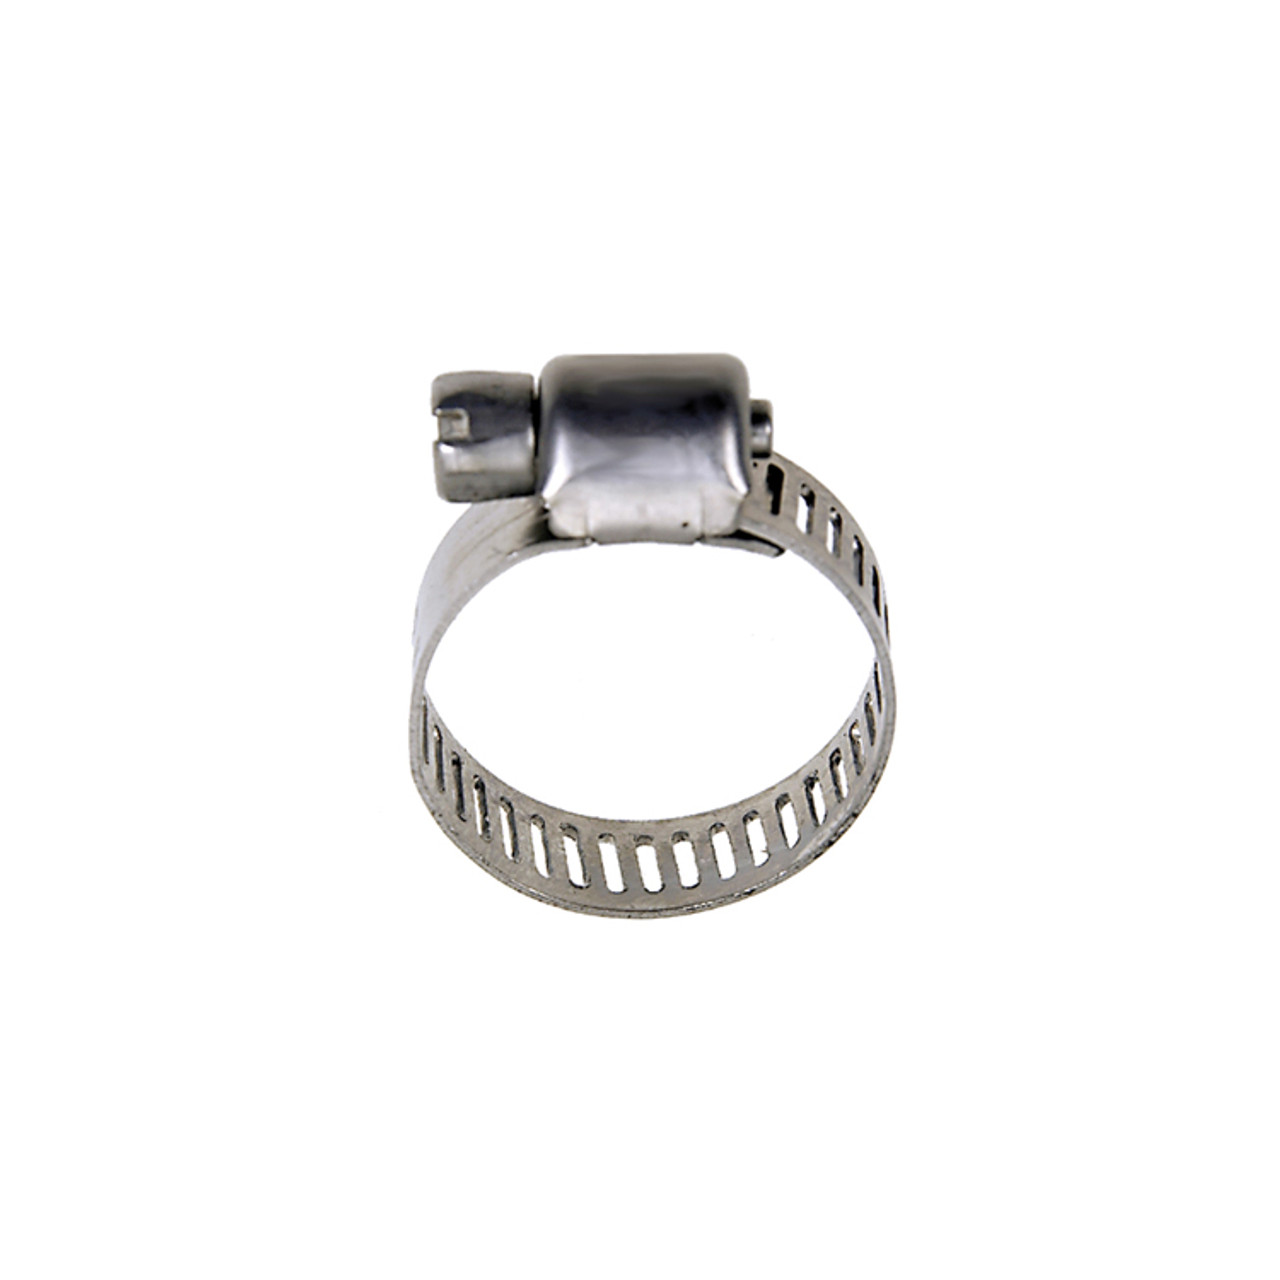 1/4" Stainless Steel Micro Worm Gear Hose Clamp   G5M-04